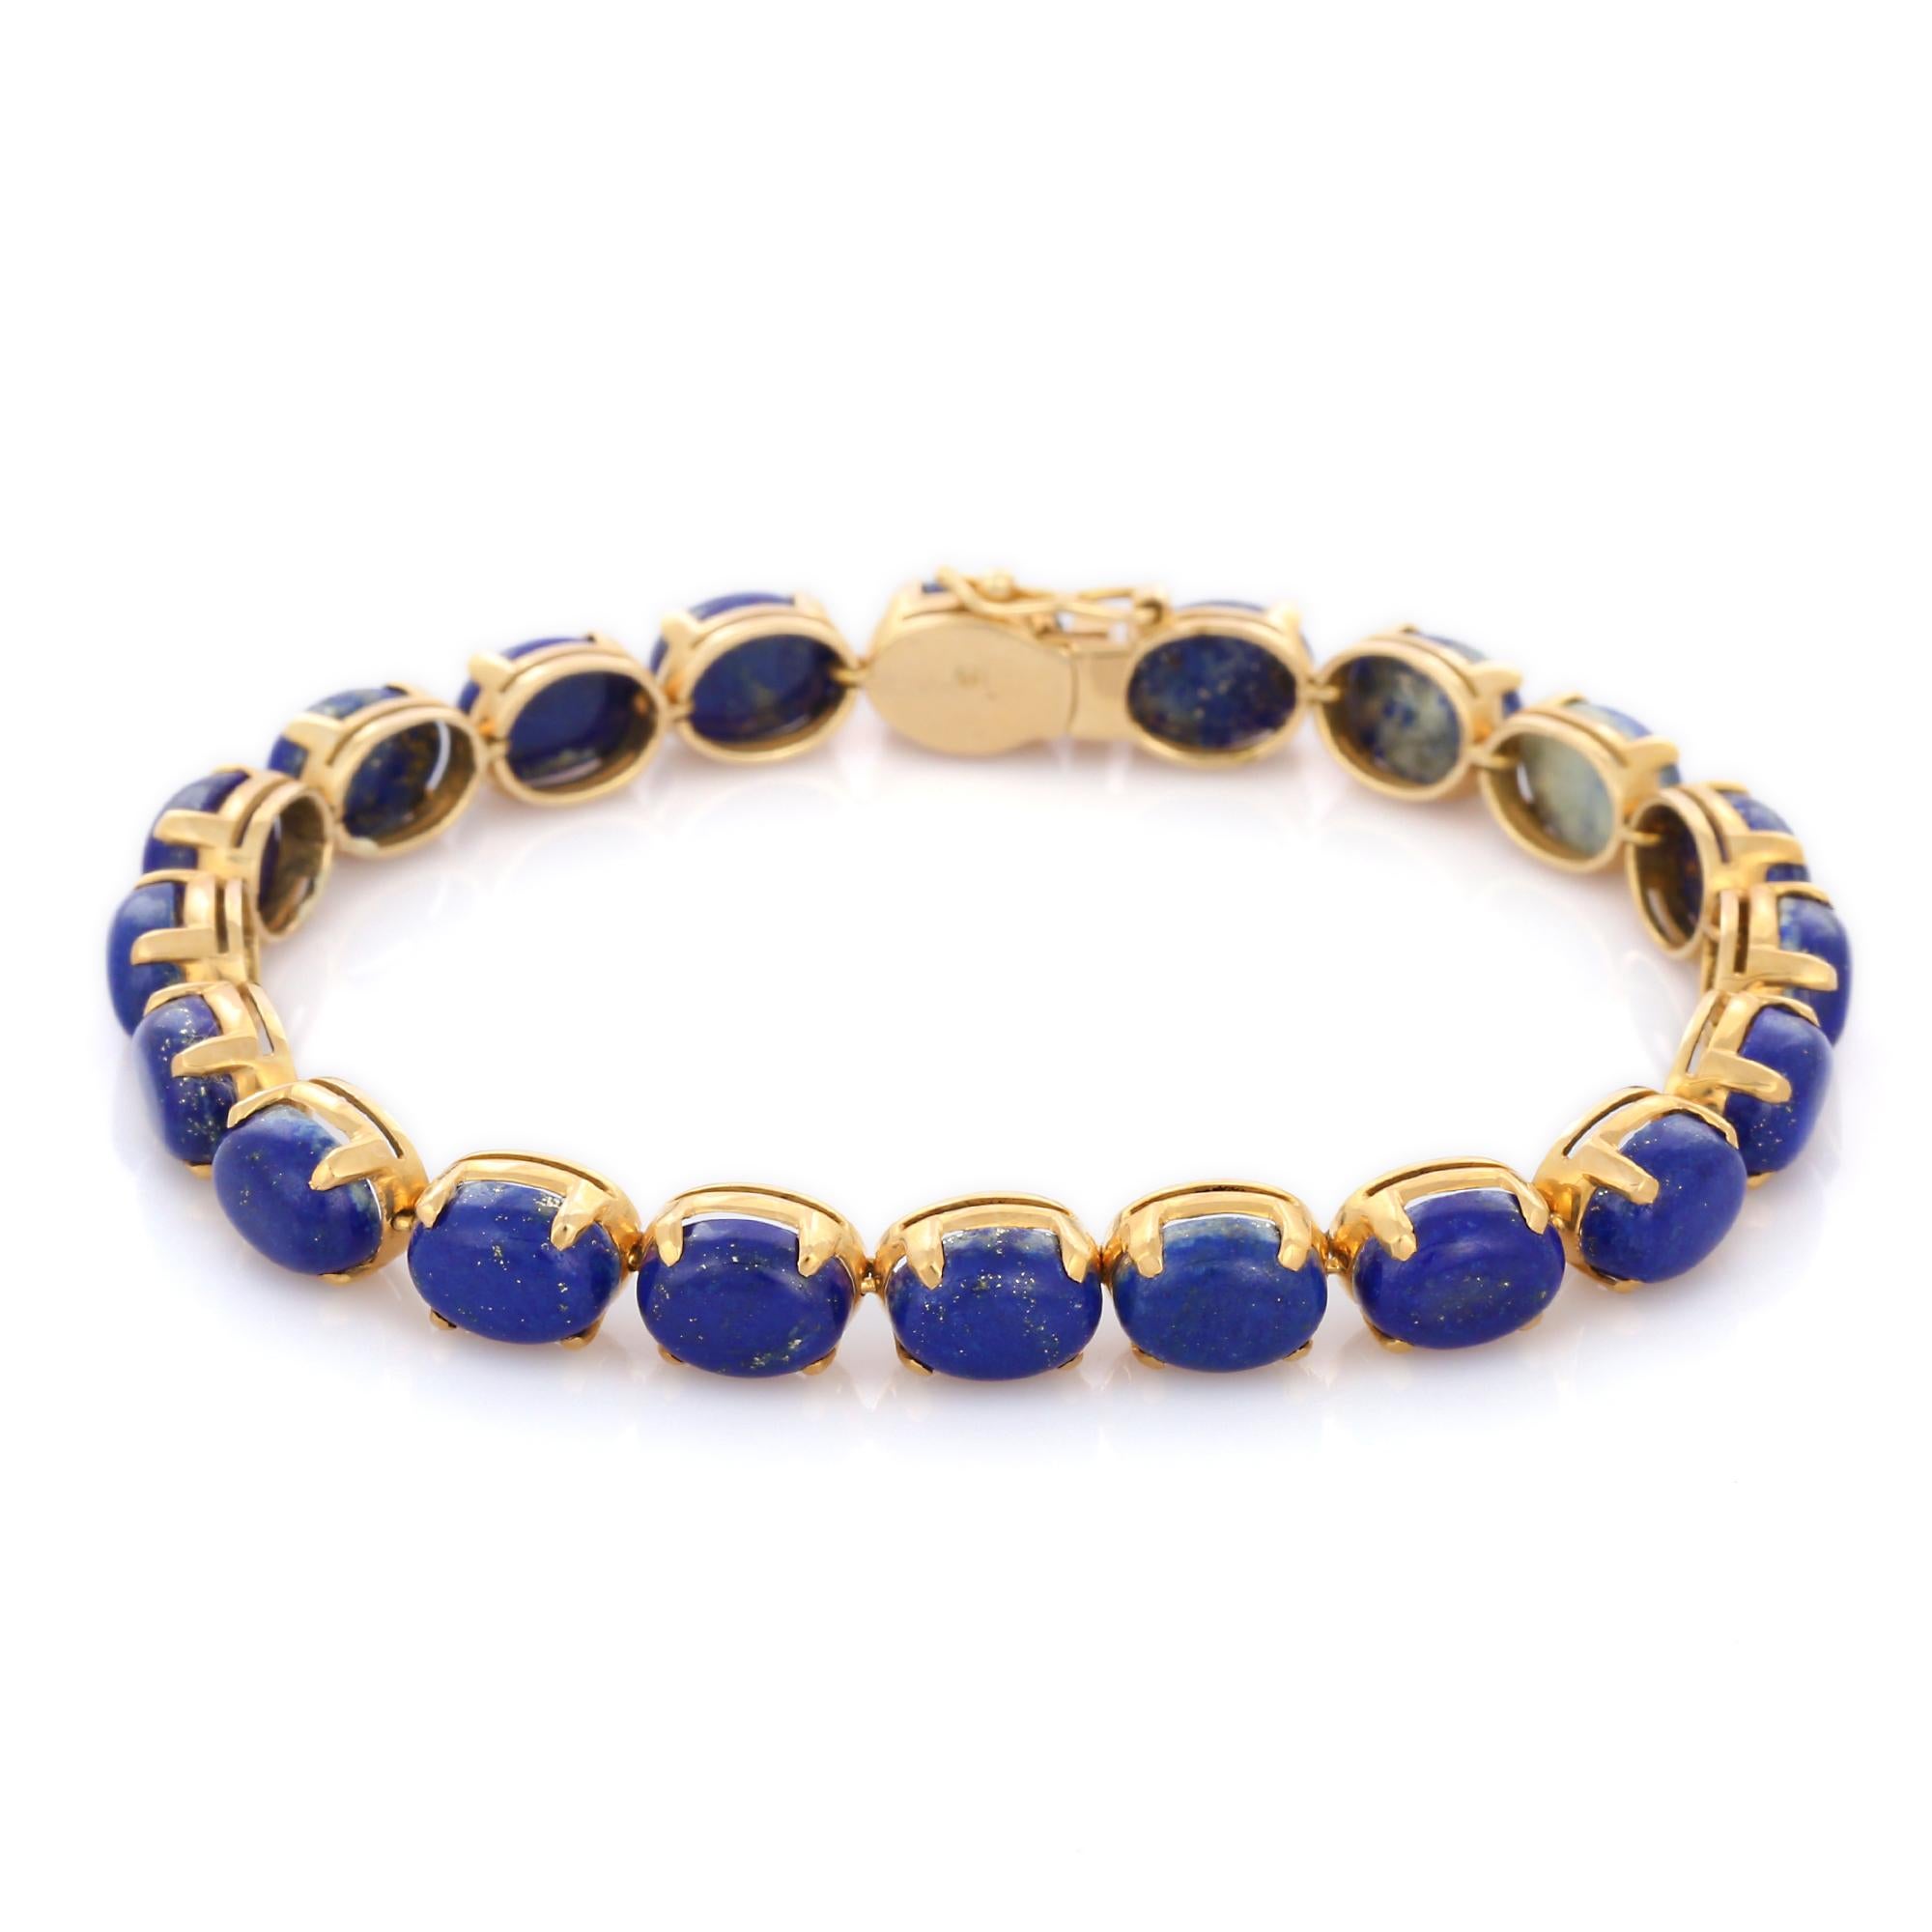 Bracelets are worn to enhance the look. Women love to look good. It is common to see a woman rocking a lovely gold bracelet on her wrist. A gold gemstone bracelet is the ultimate statement piece for every stylish woman.
Lapis Lazuli tennis bracelet